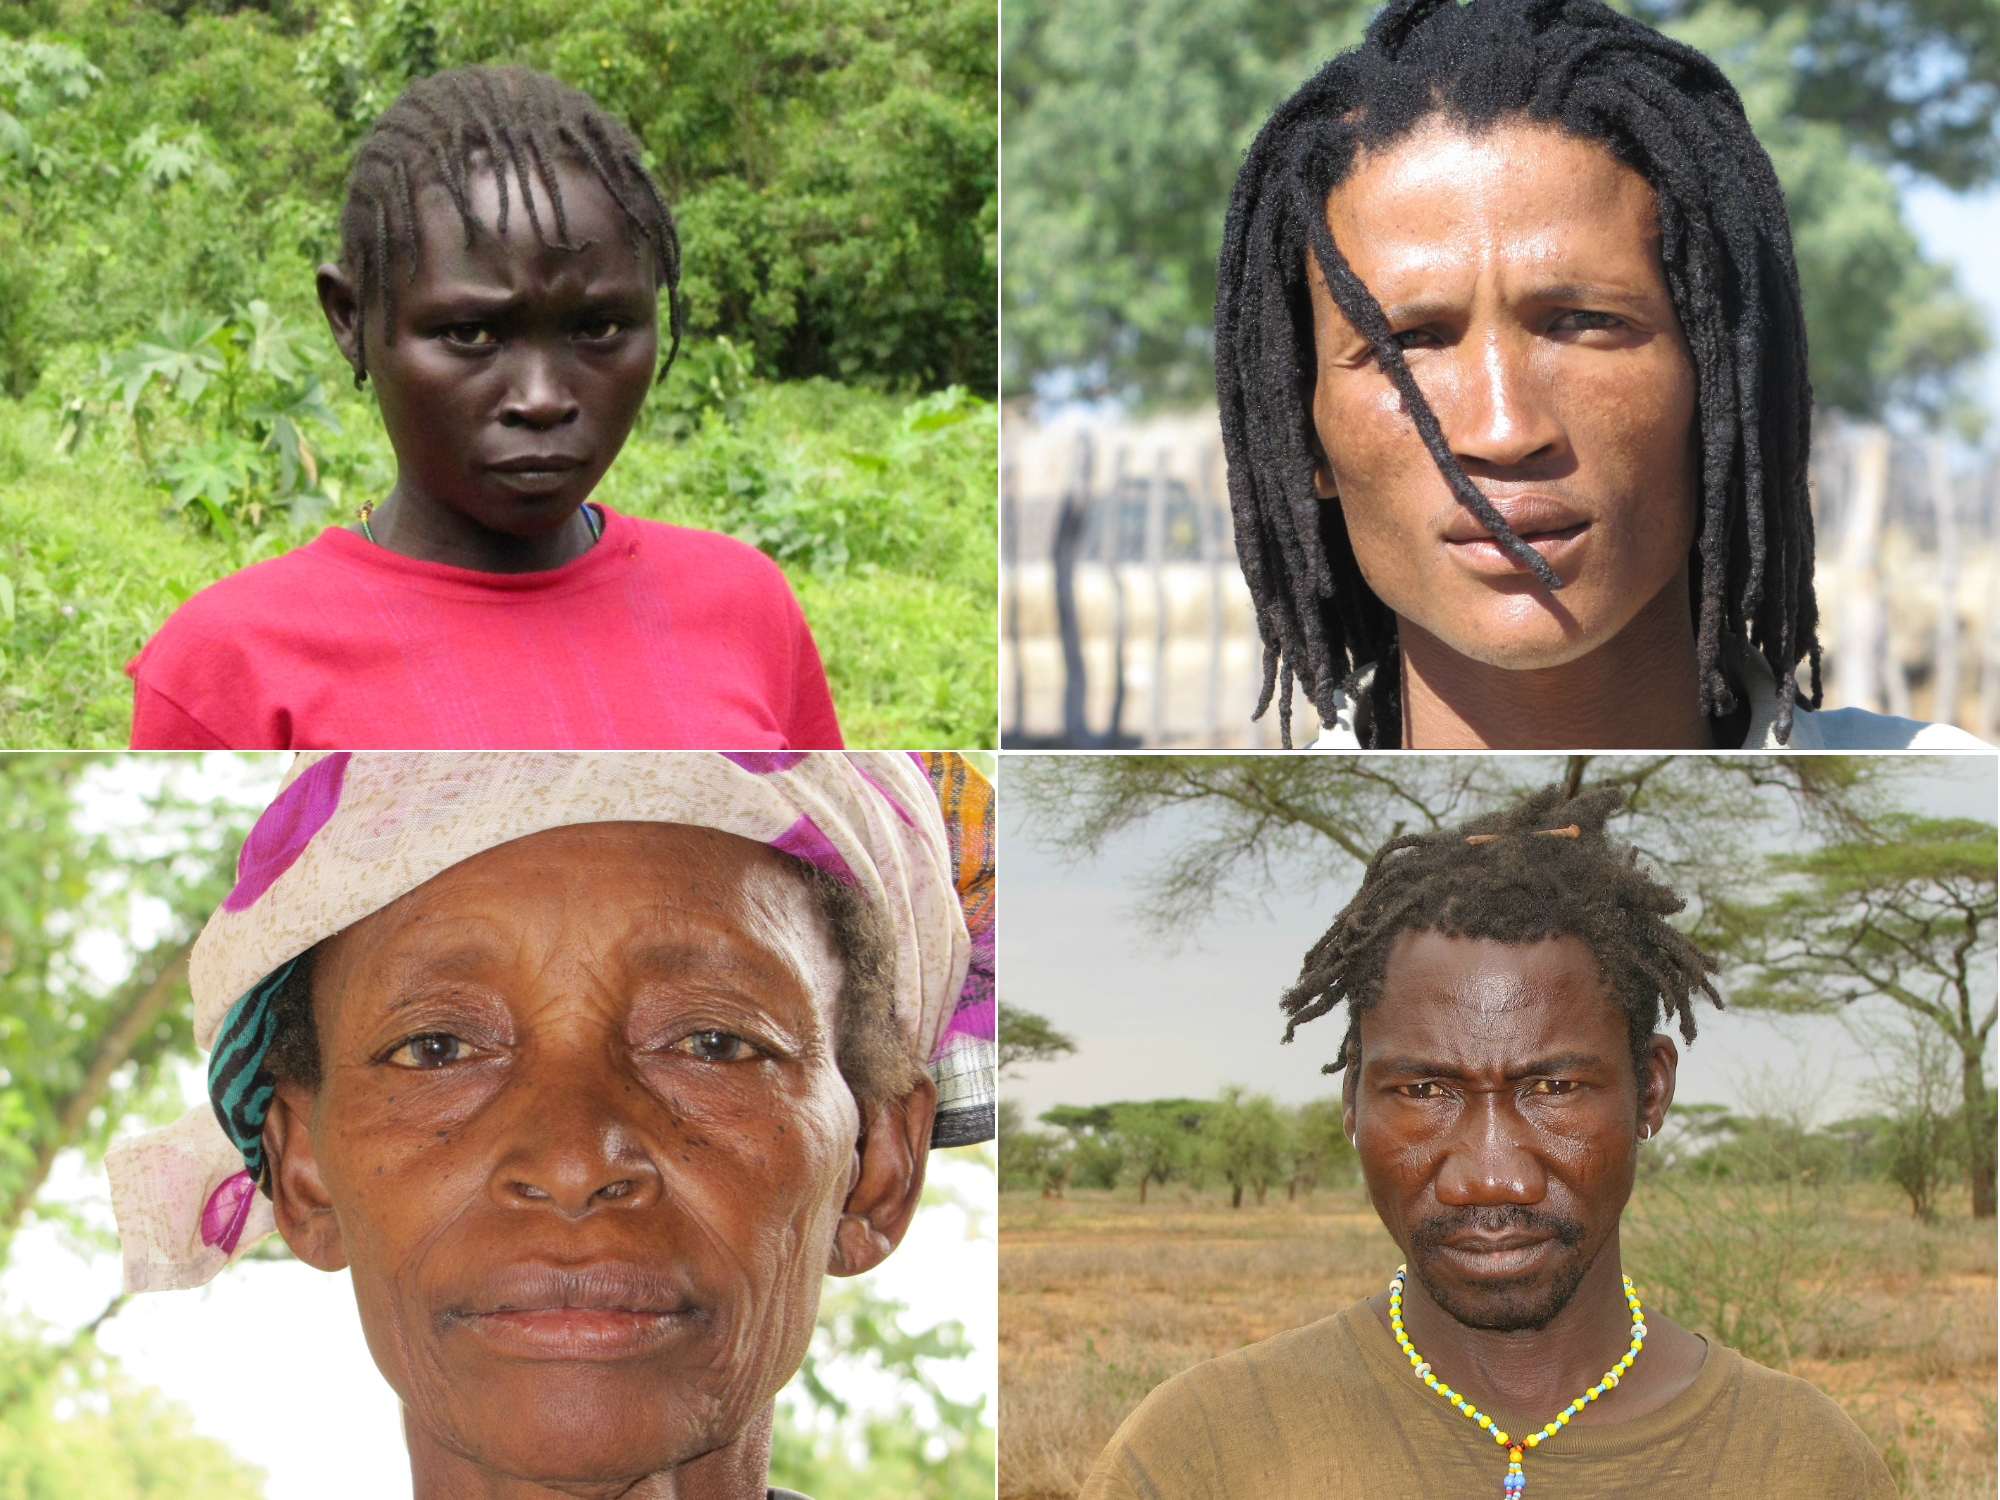 Four pictures of African individuals, two men and two women, who all look very different.